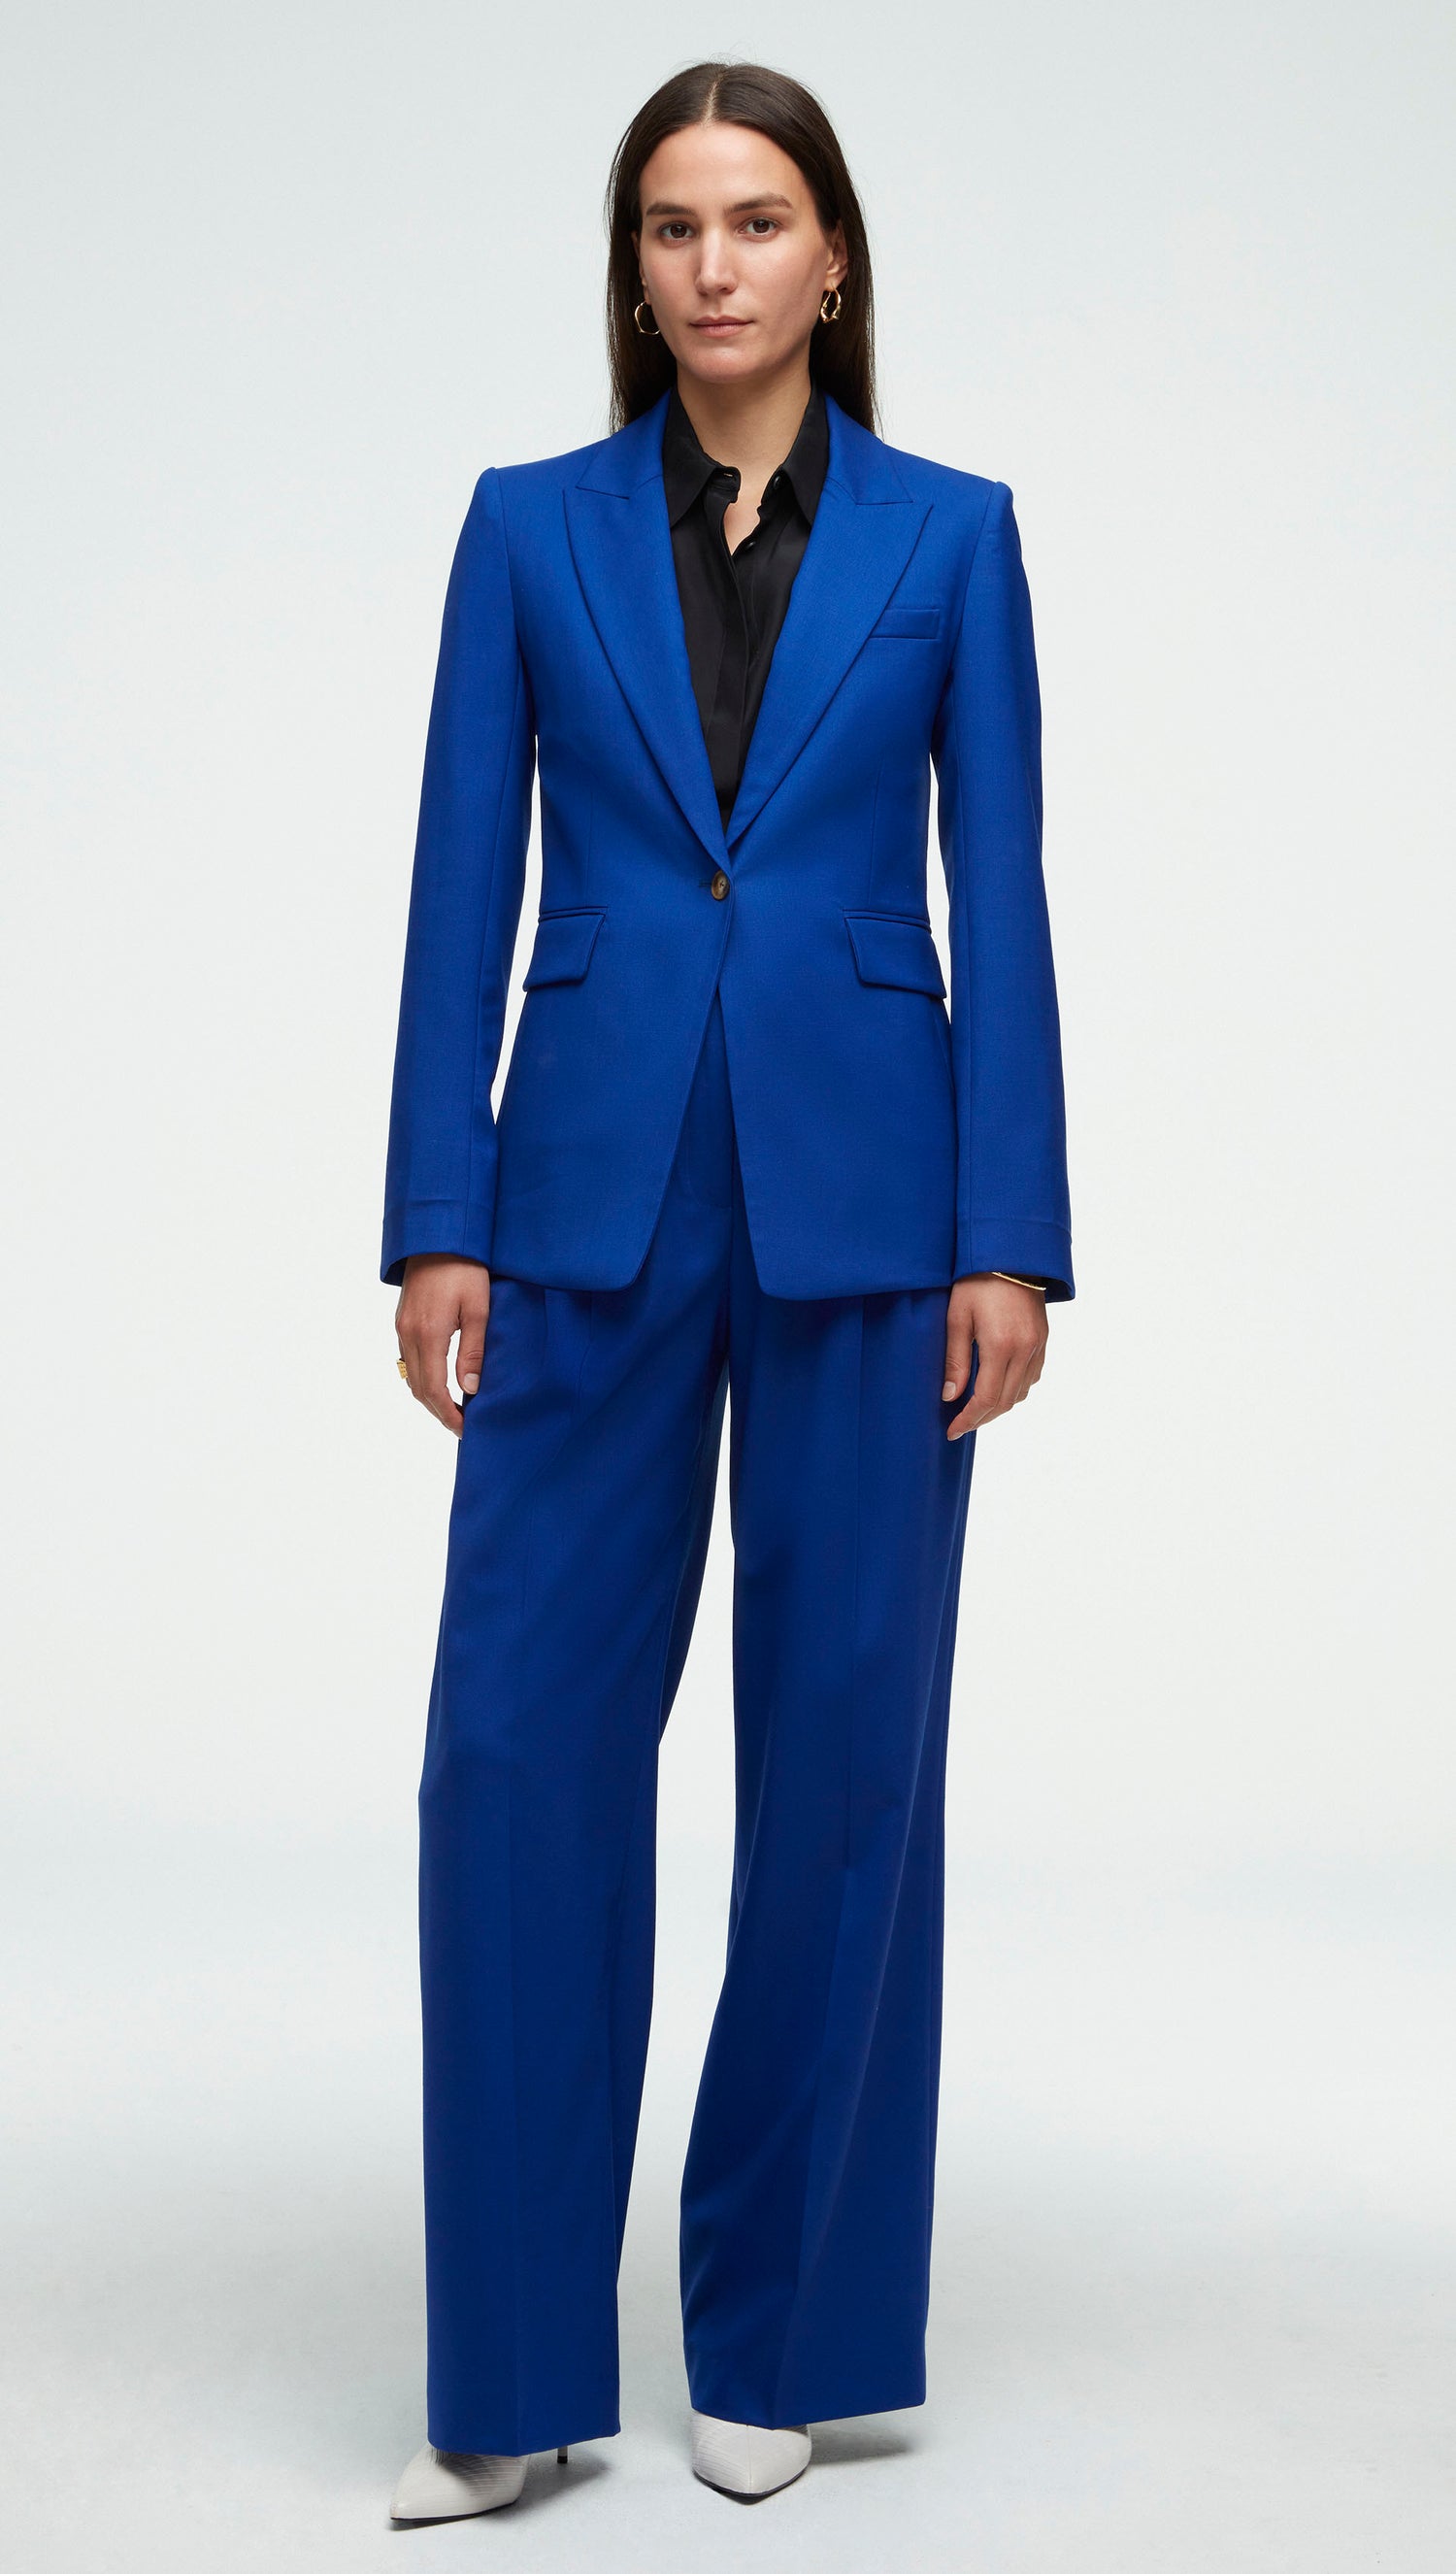 Theory Etiennette B Good Wool Suit Jacket | Nordstrom | Jackets, Theory  clothing, Wool suit